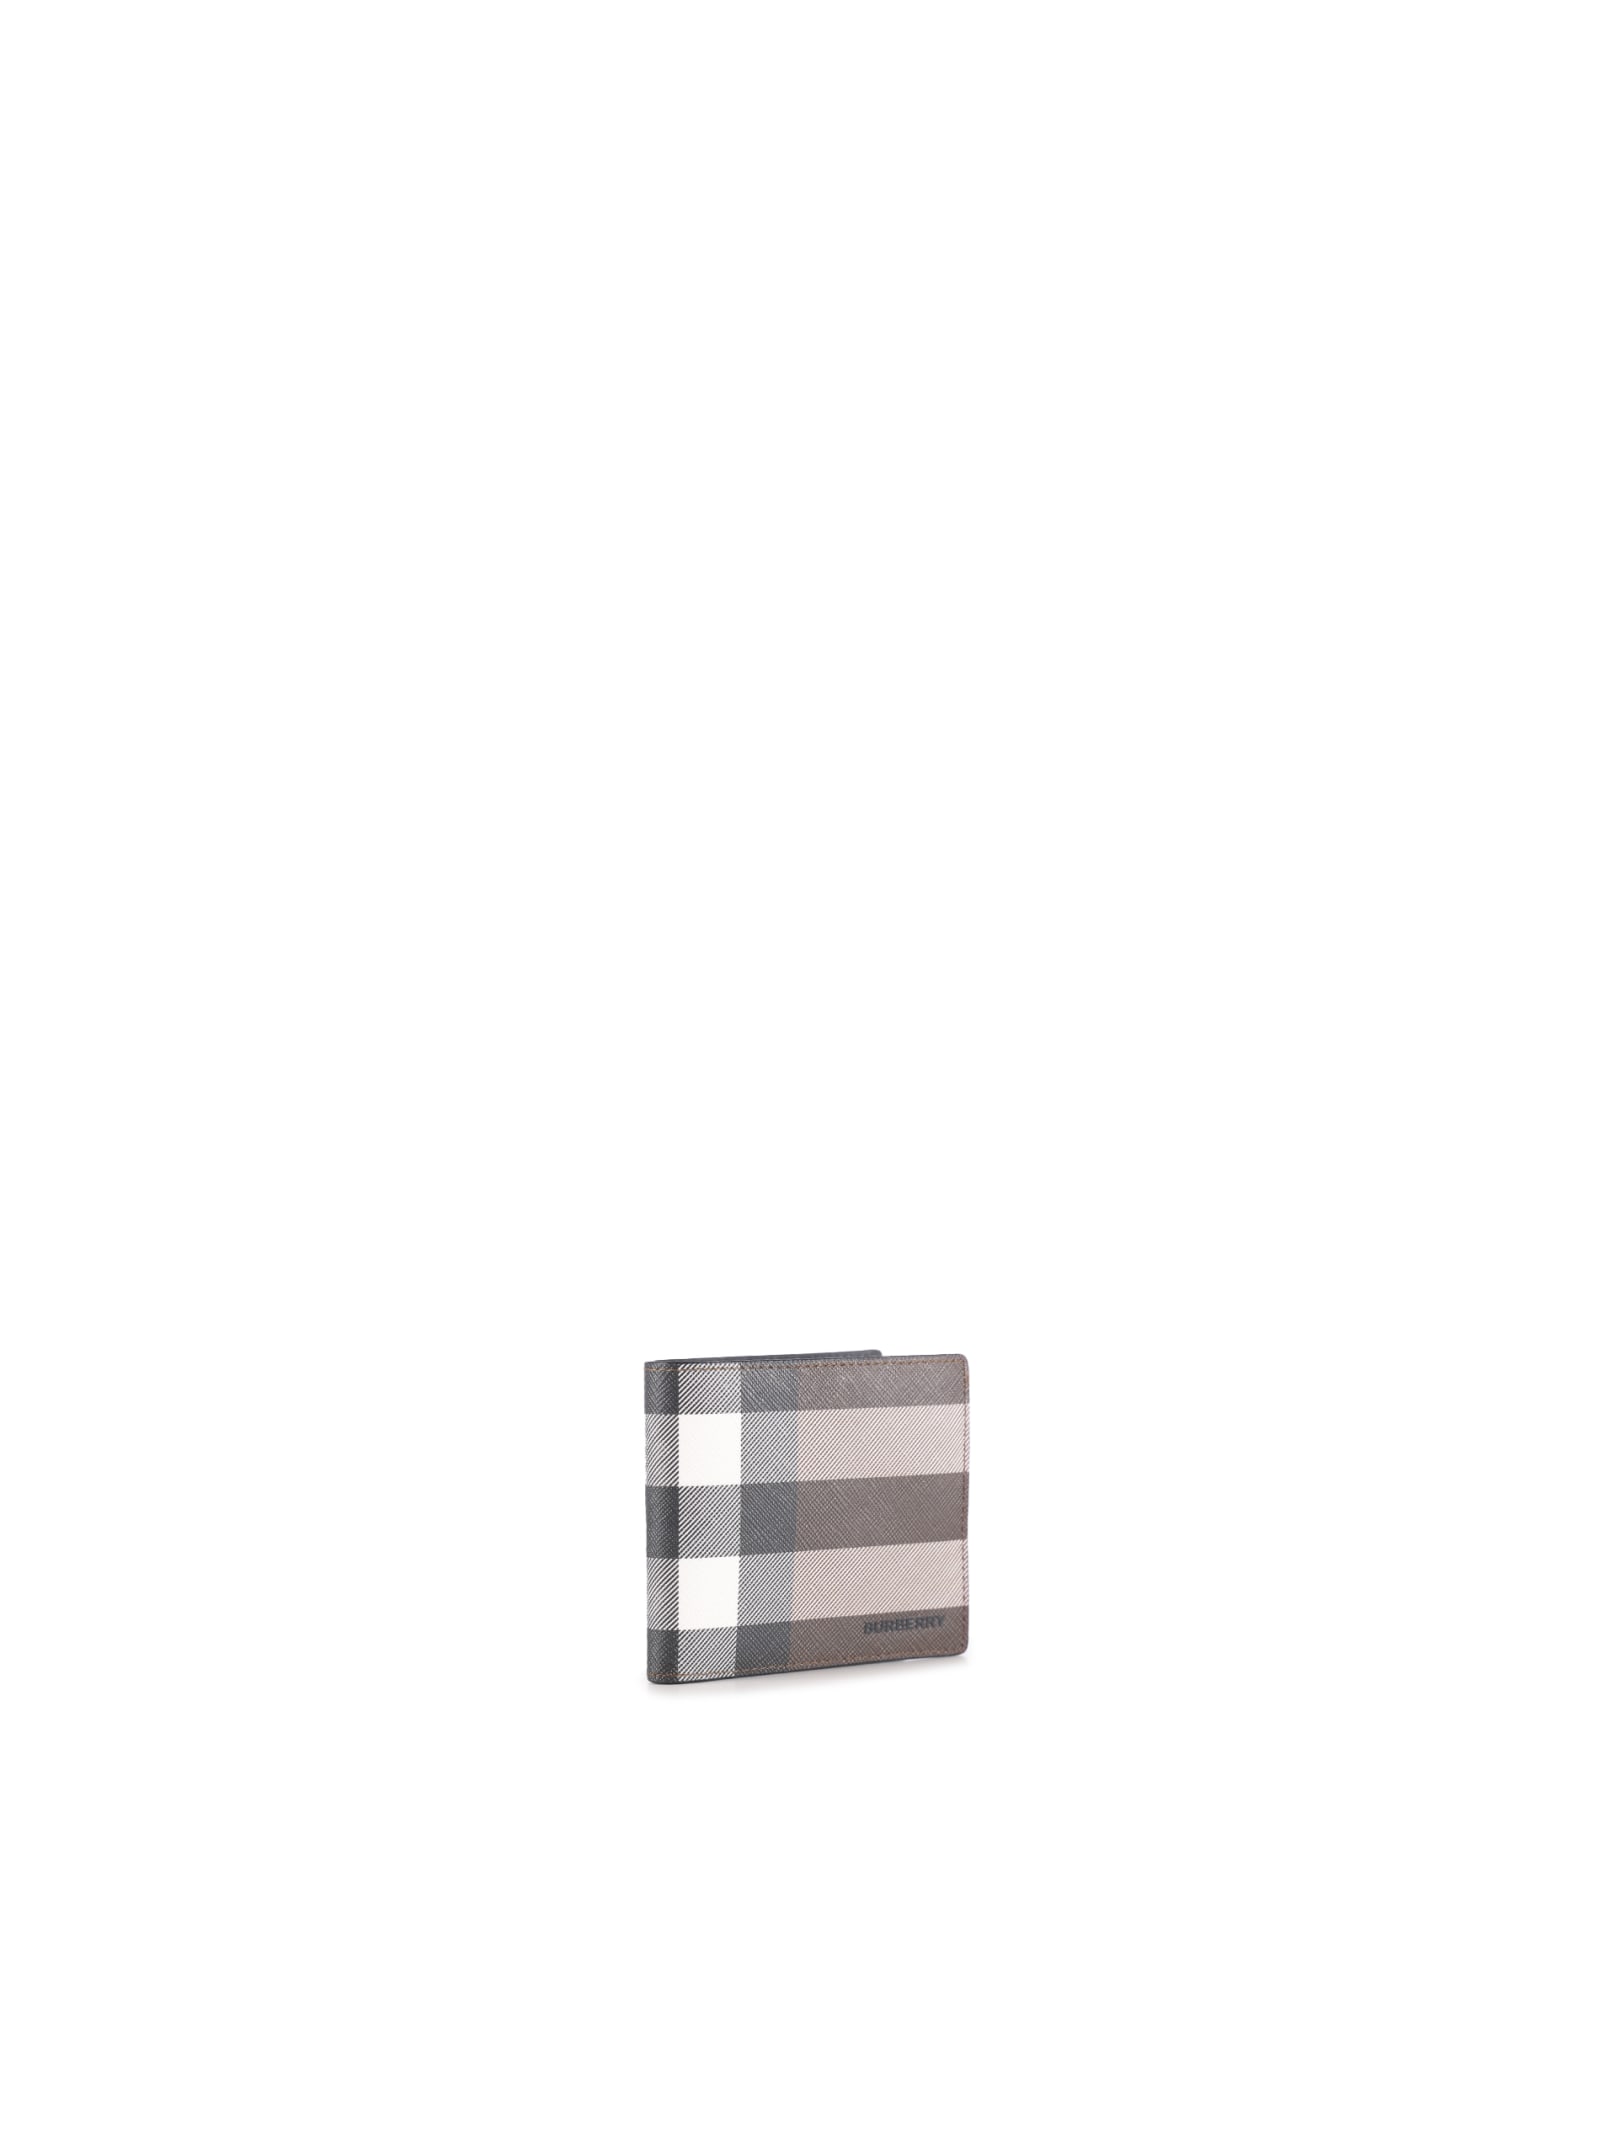 Burberry Check Bifold Coin Wallet